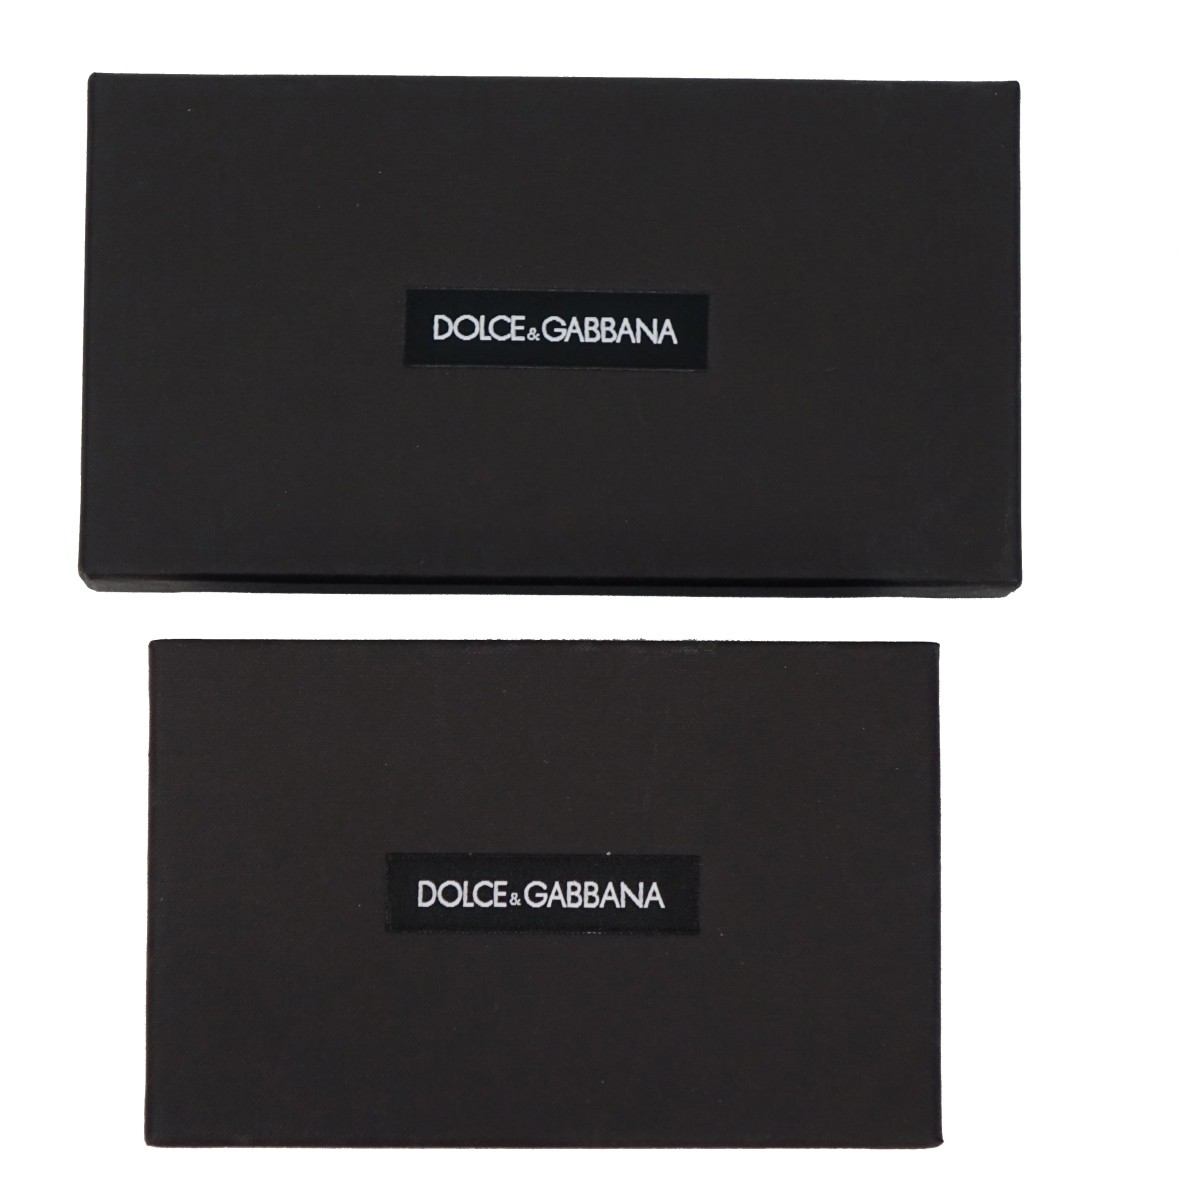 Dolce & Gabbana Iphone 11 and Airpods Cases